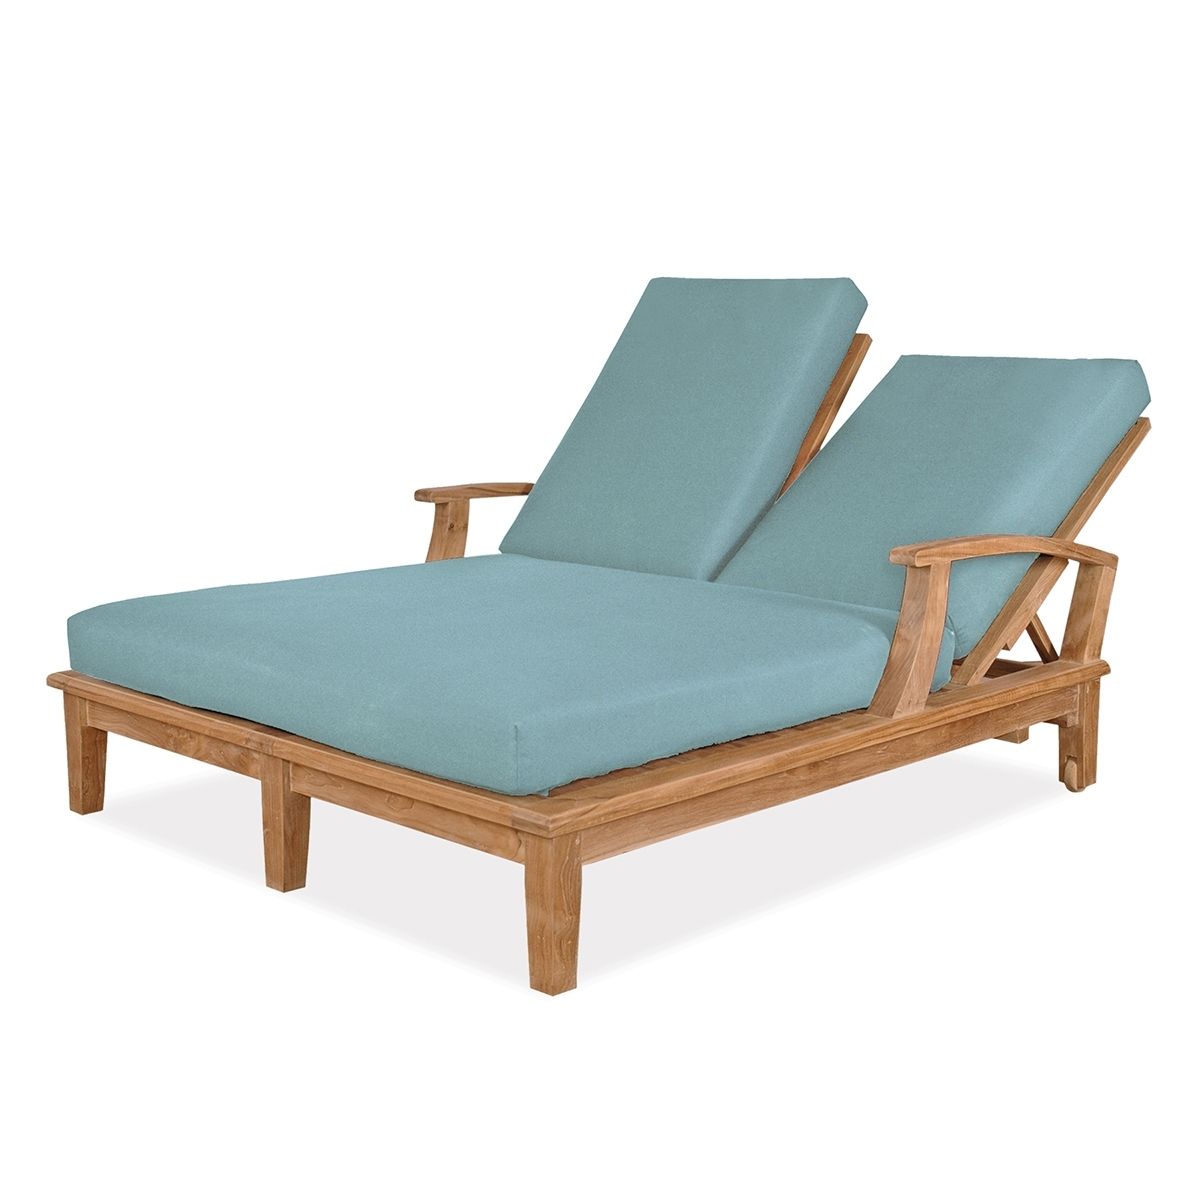 Teal Chaise Lounges Inside Most Up To Date Double Chaise Cushion Set Replacement (View 13 of 15)